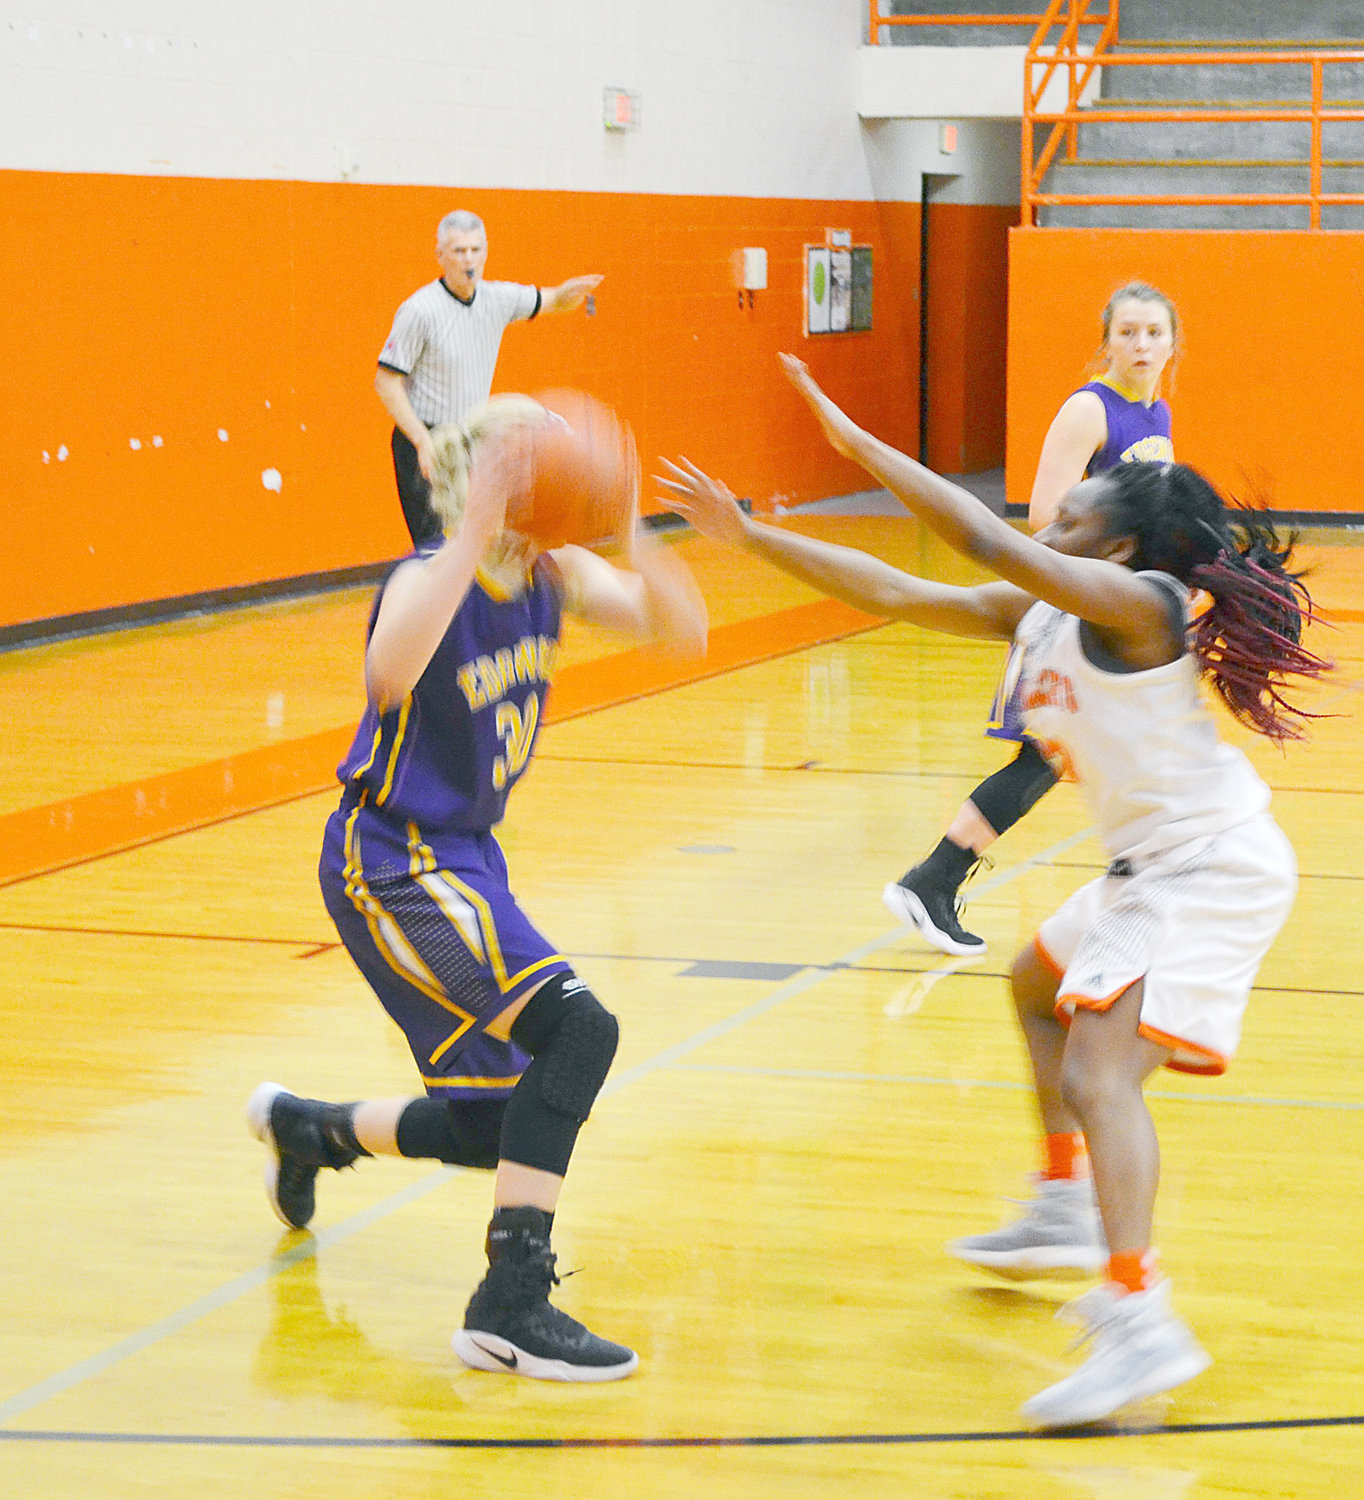 Jessiah Riley (12) plays defense against Edgewood in the Lady Jackets’ win Friday night. (Photo by Evan Dudley)